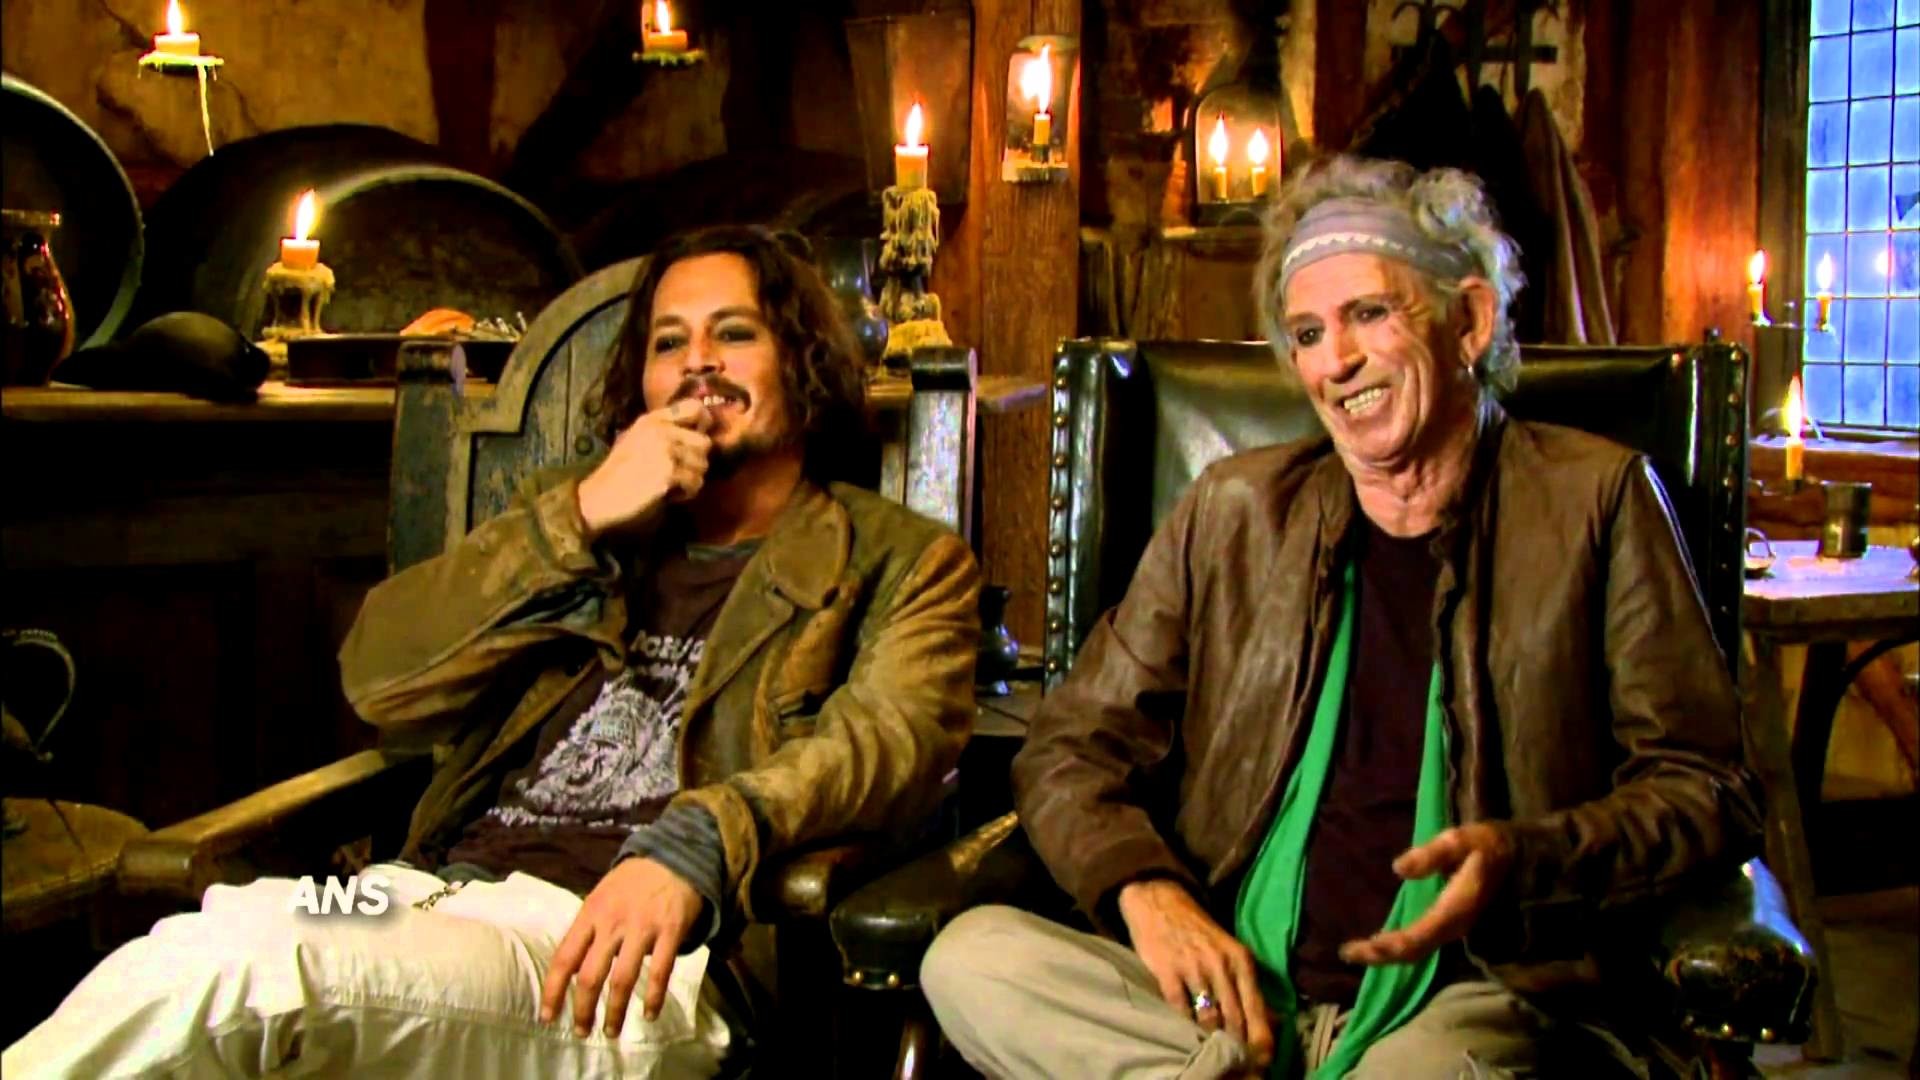 1920x1080 ROLLING STONES KEITH RICHARDS & JOHNNY DEPP HAVE STRANGE FATHER & SON  RELATIONSHIP - YouTube